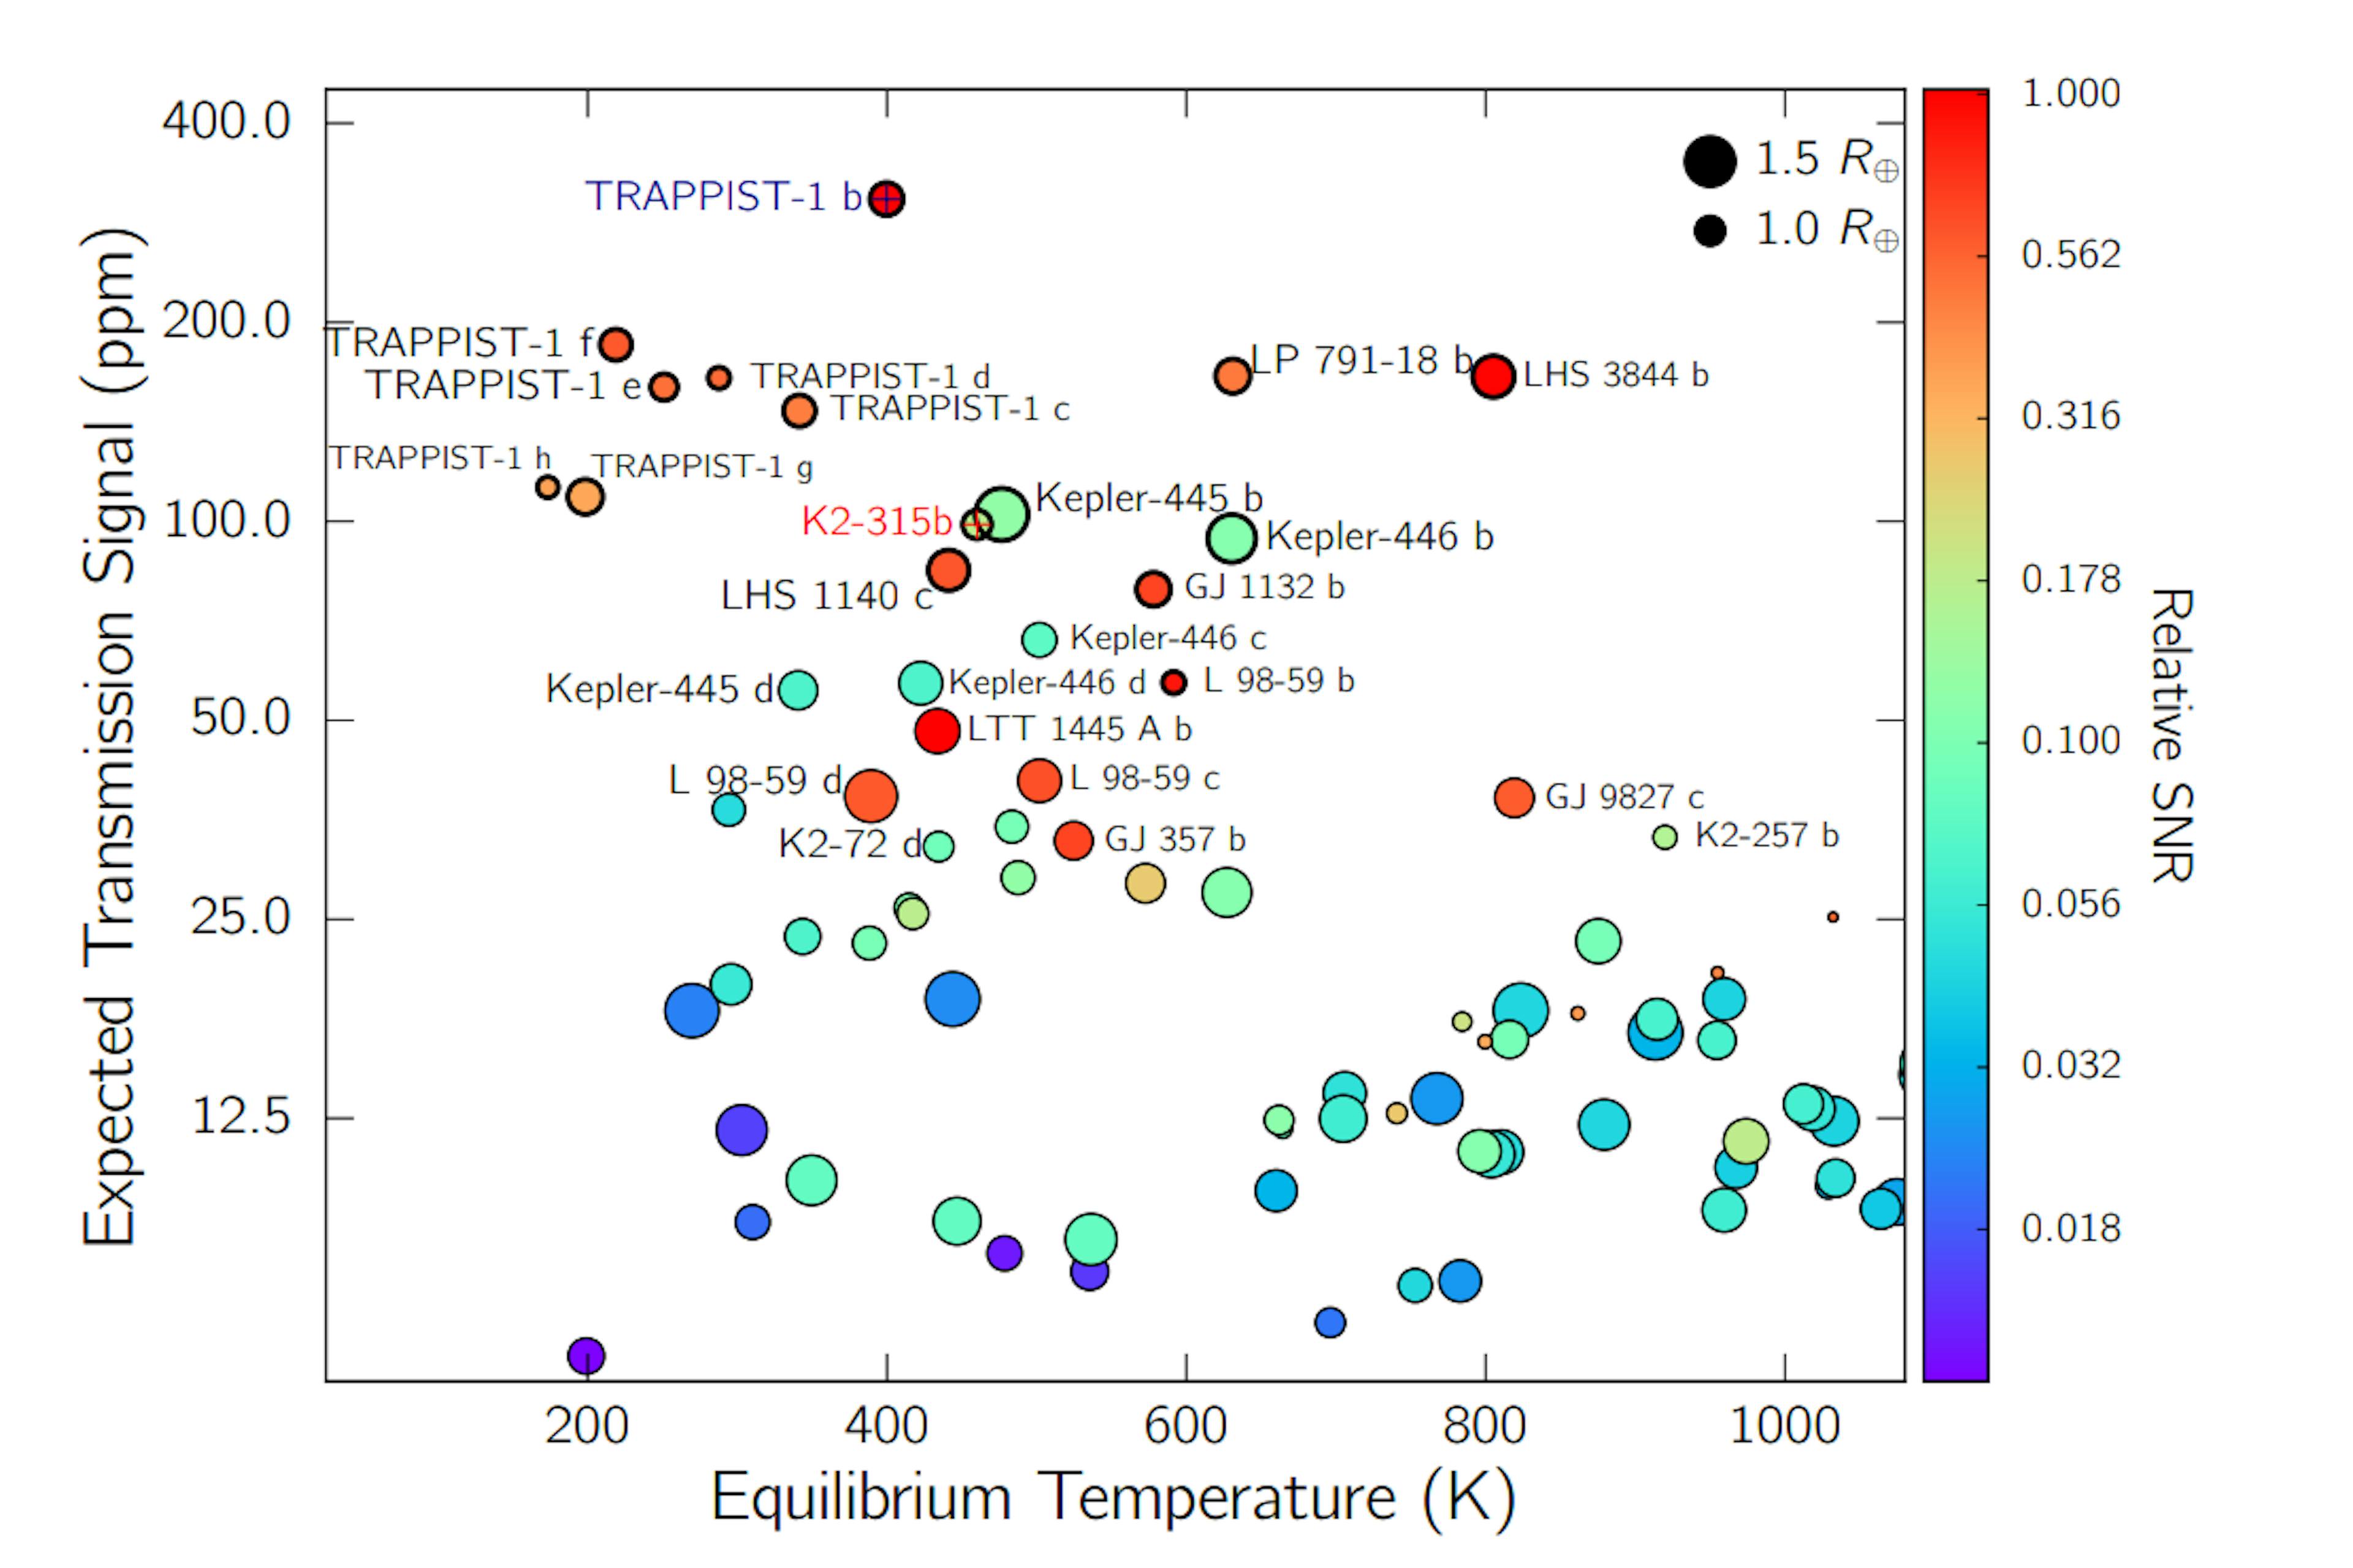 Figure 7. Most promising terrestrial planets for atmospheric characterization. Point colors illustrate the SNR of a JWST/NIRSPEC observation relative to TRAPPIST-1 b. SNR below 1/100th of TRAPPIST-1b and transmission signal less than 5 ppm have been removed to enhance readability of the figure. The planets for which the presence of an atmosphere could be assessed by JWST within ∼ 50 transits are encircled in black, if their atmospheric signals are above JWST’s threshold of ∼50 ppm. The rest of the uncircled pool of terrestrial planets may be accessible with the successors of JWST if ten times better performance can be achieved. The size of the circle is proportional to the size of the planet. Circles for 1.5 R⊕ and 1.0 R⊕ are drawn in the upper right corner for reference.